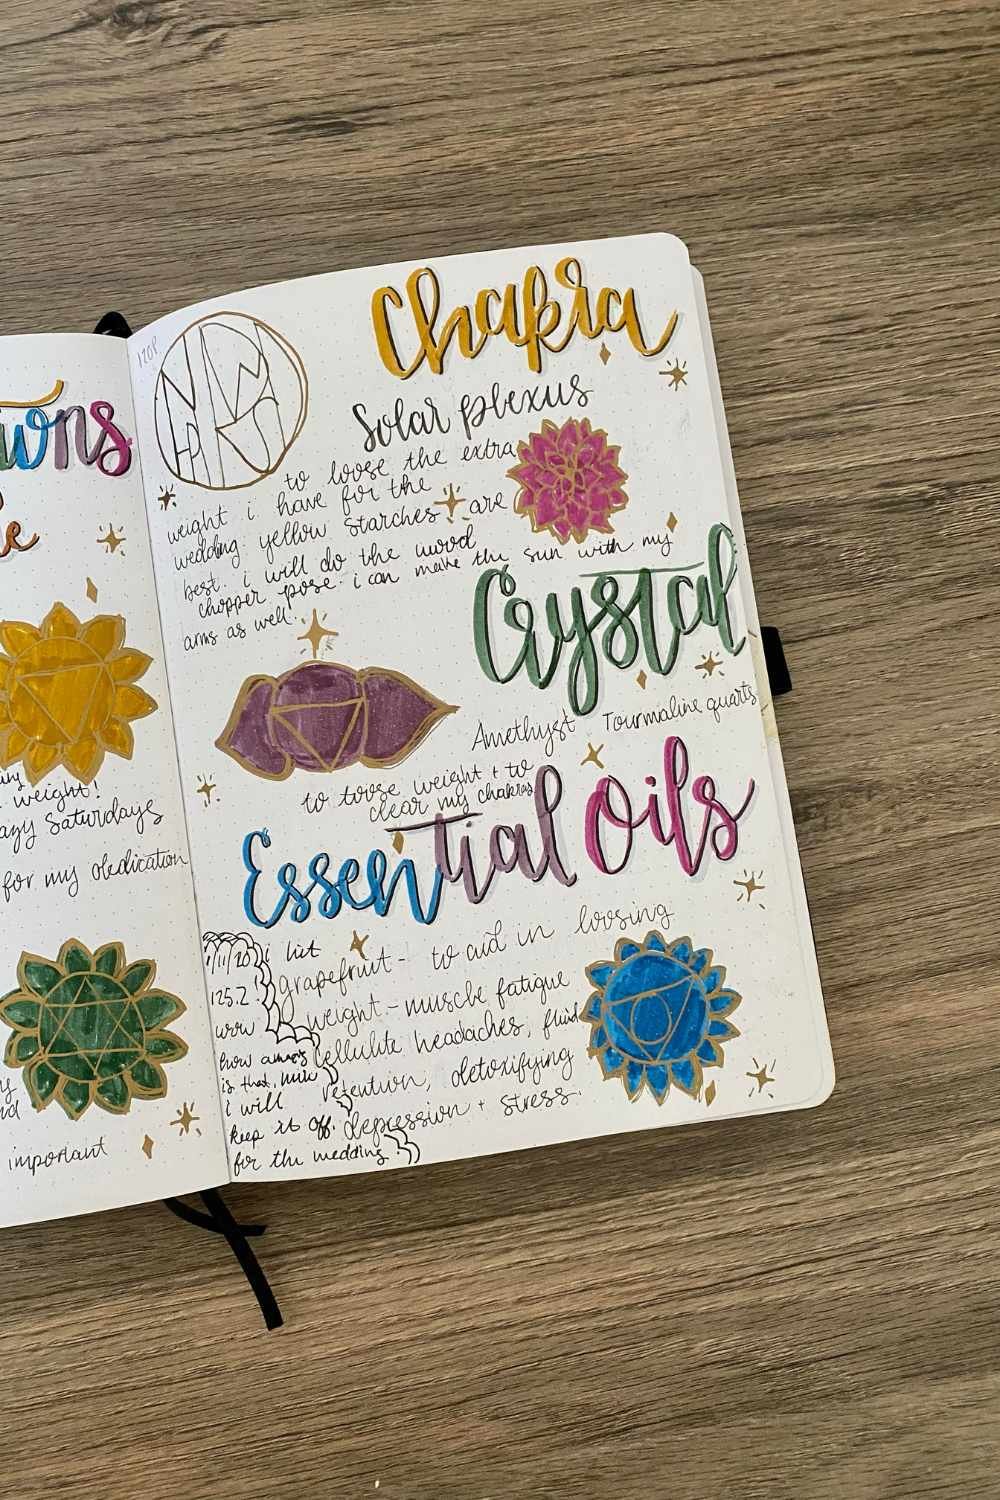 Witchy-Aesthetic-Bullet Journal-Pages-6.jpg